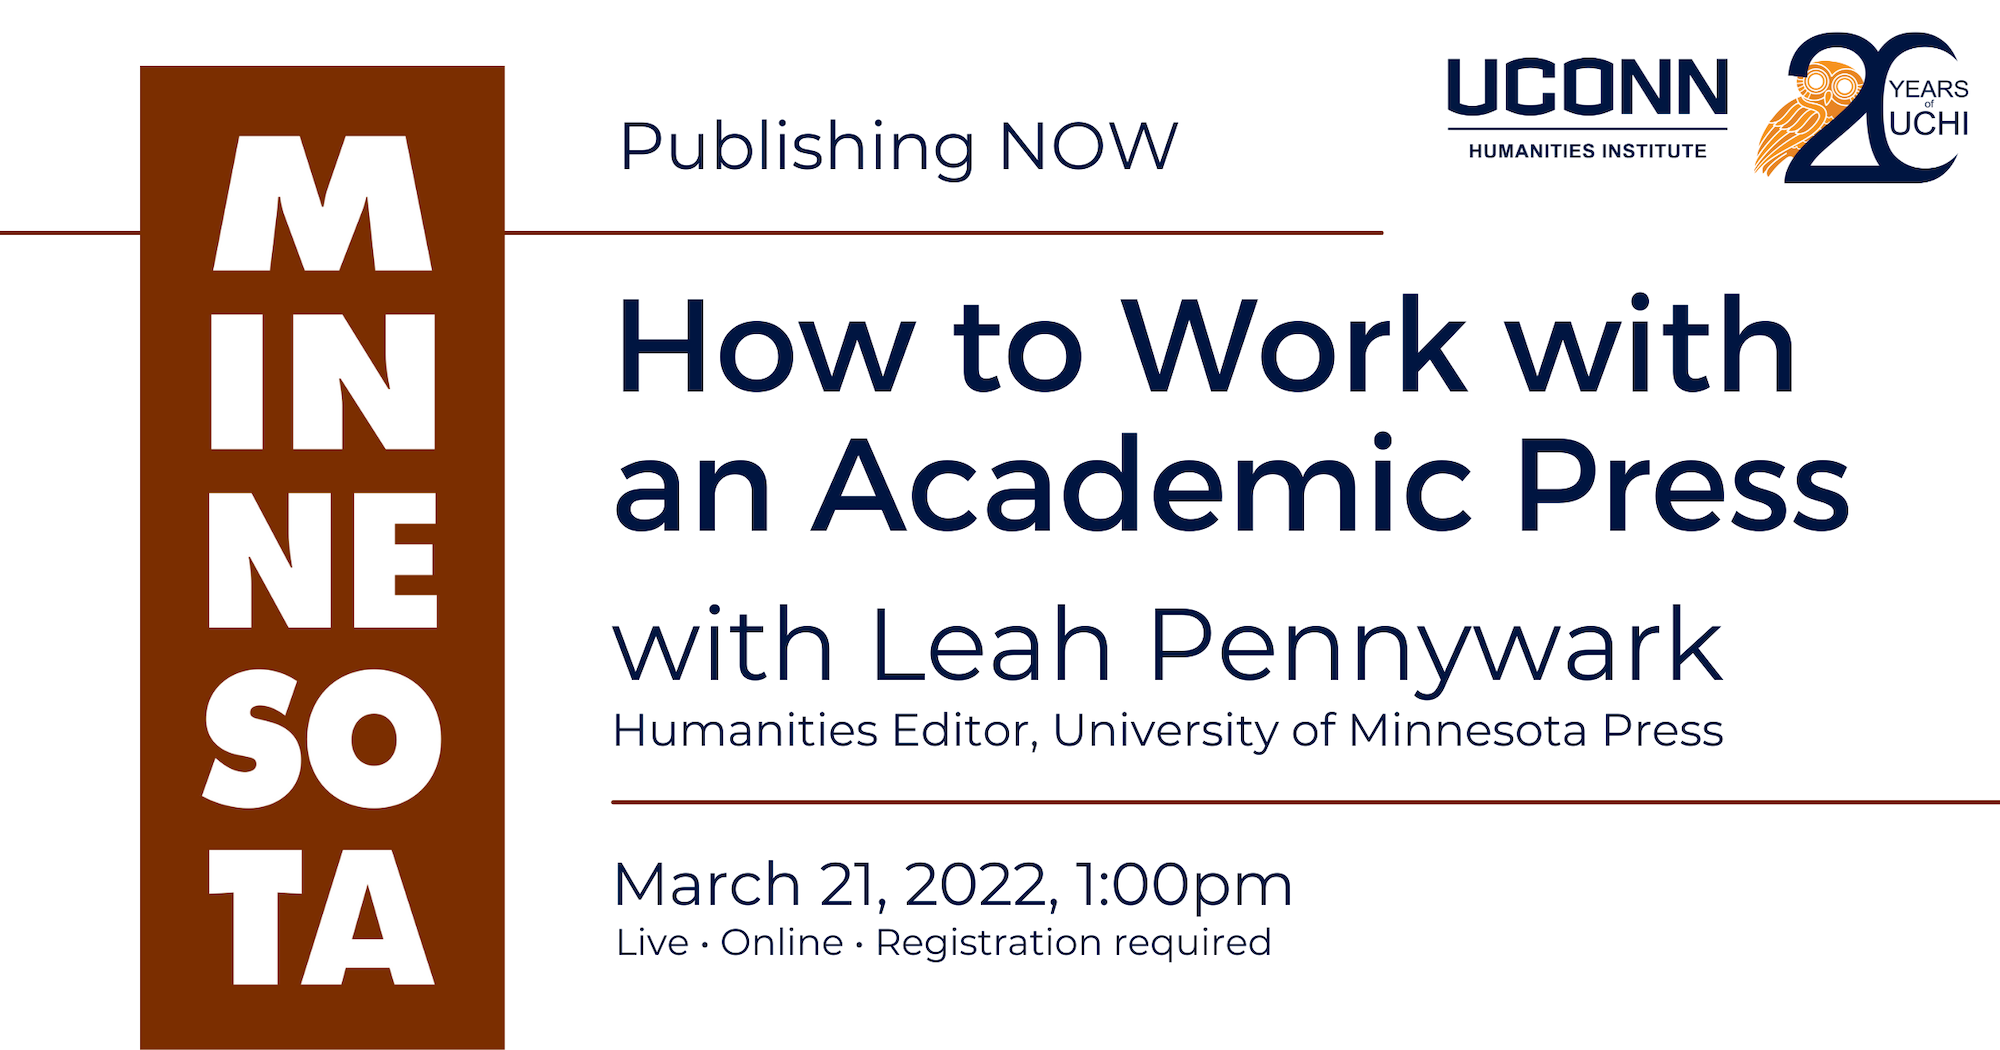 Publishing NOW: How to Work with an Academic Press, with Leah Pennywark, Humanities Editor at University of Minnesota Press. March 21, 2022, 1:00pm. Live. Online. Registration required.